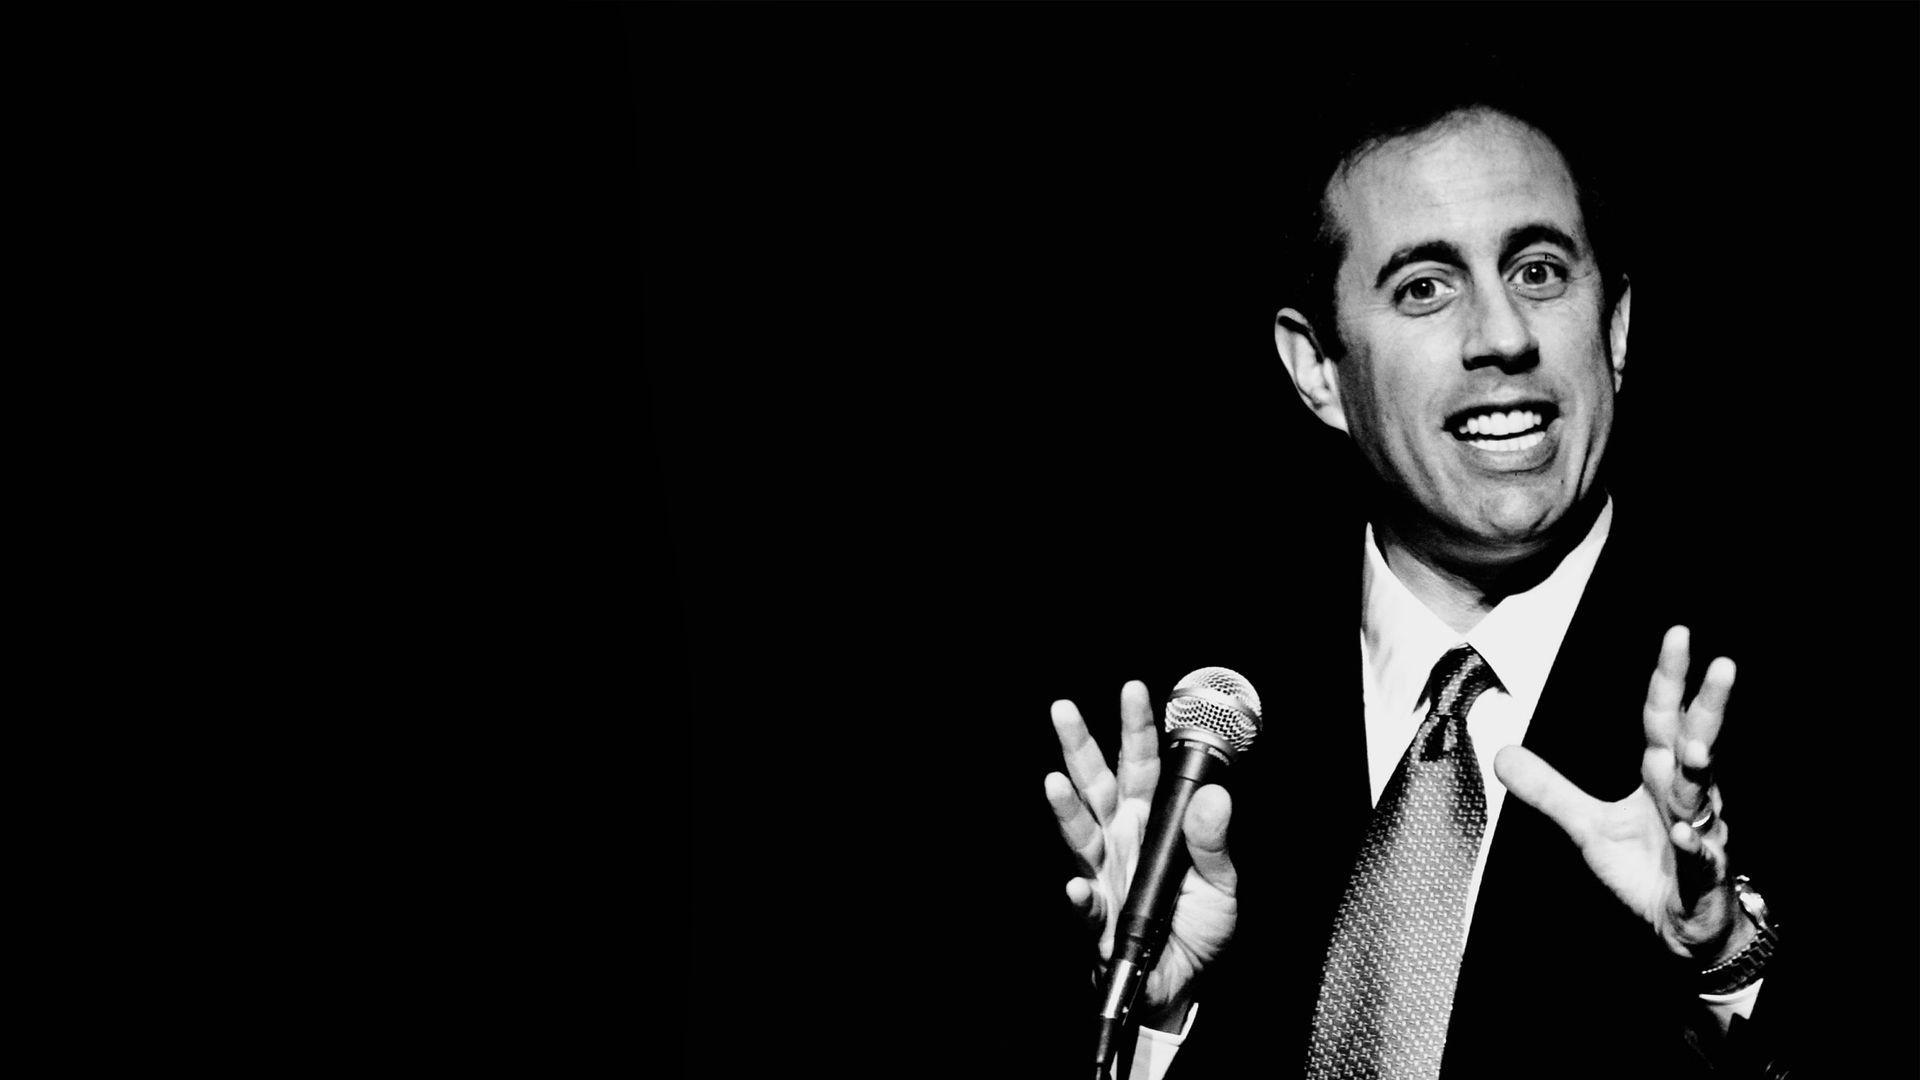 jerry seinfeld quotes Wallpaper HD Wallpaper. WALLPAPERS